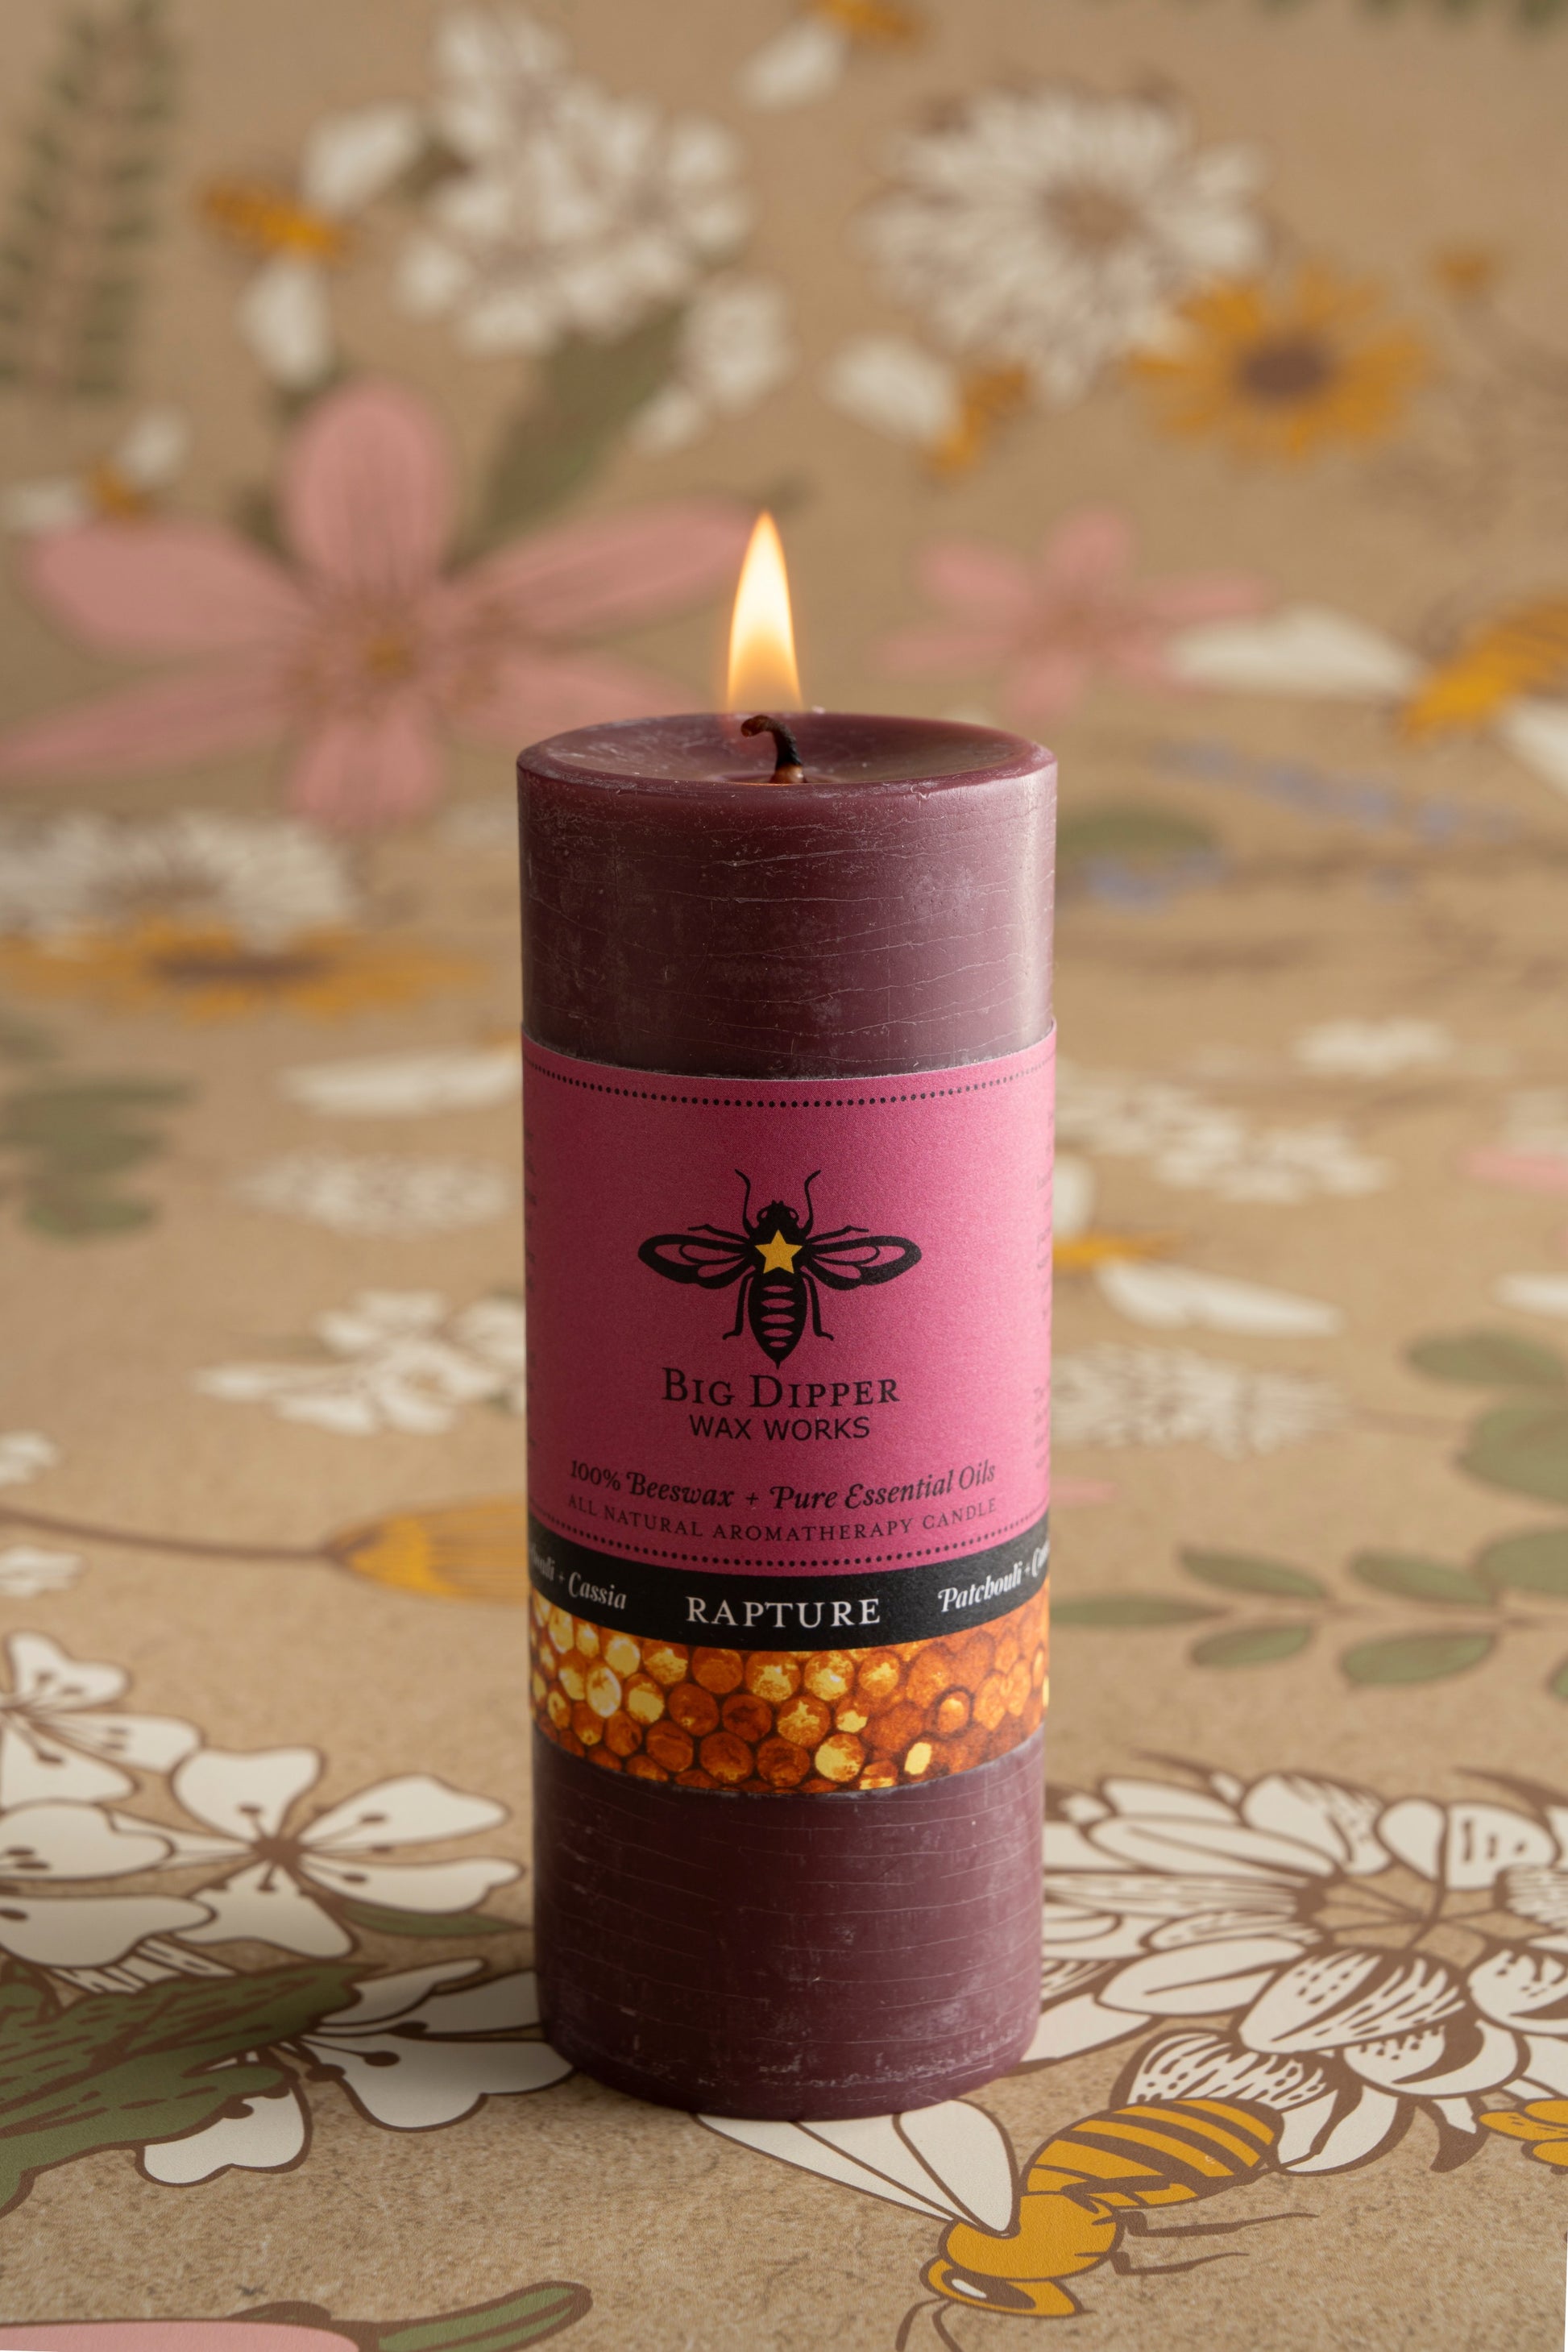 Big dipper wax works aromatherapy pillar candles in red